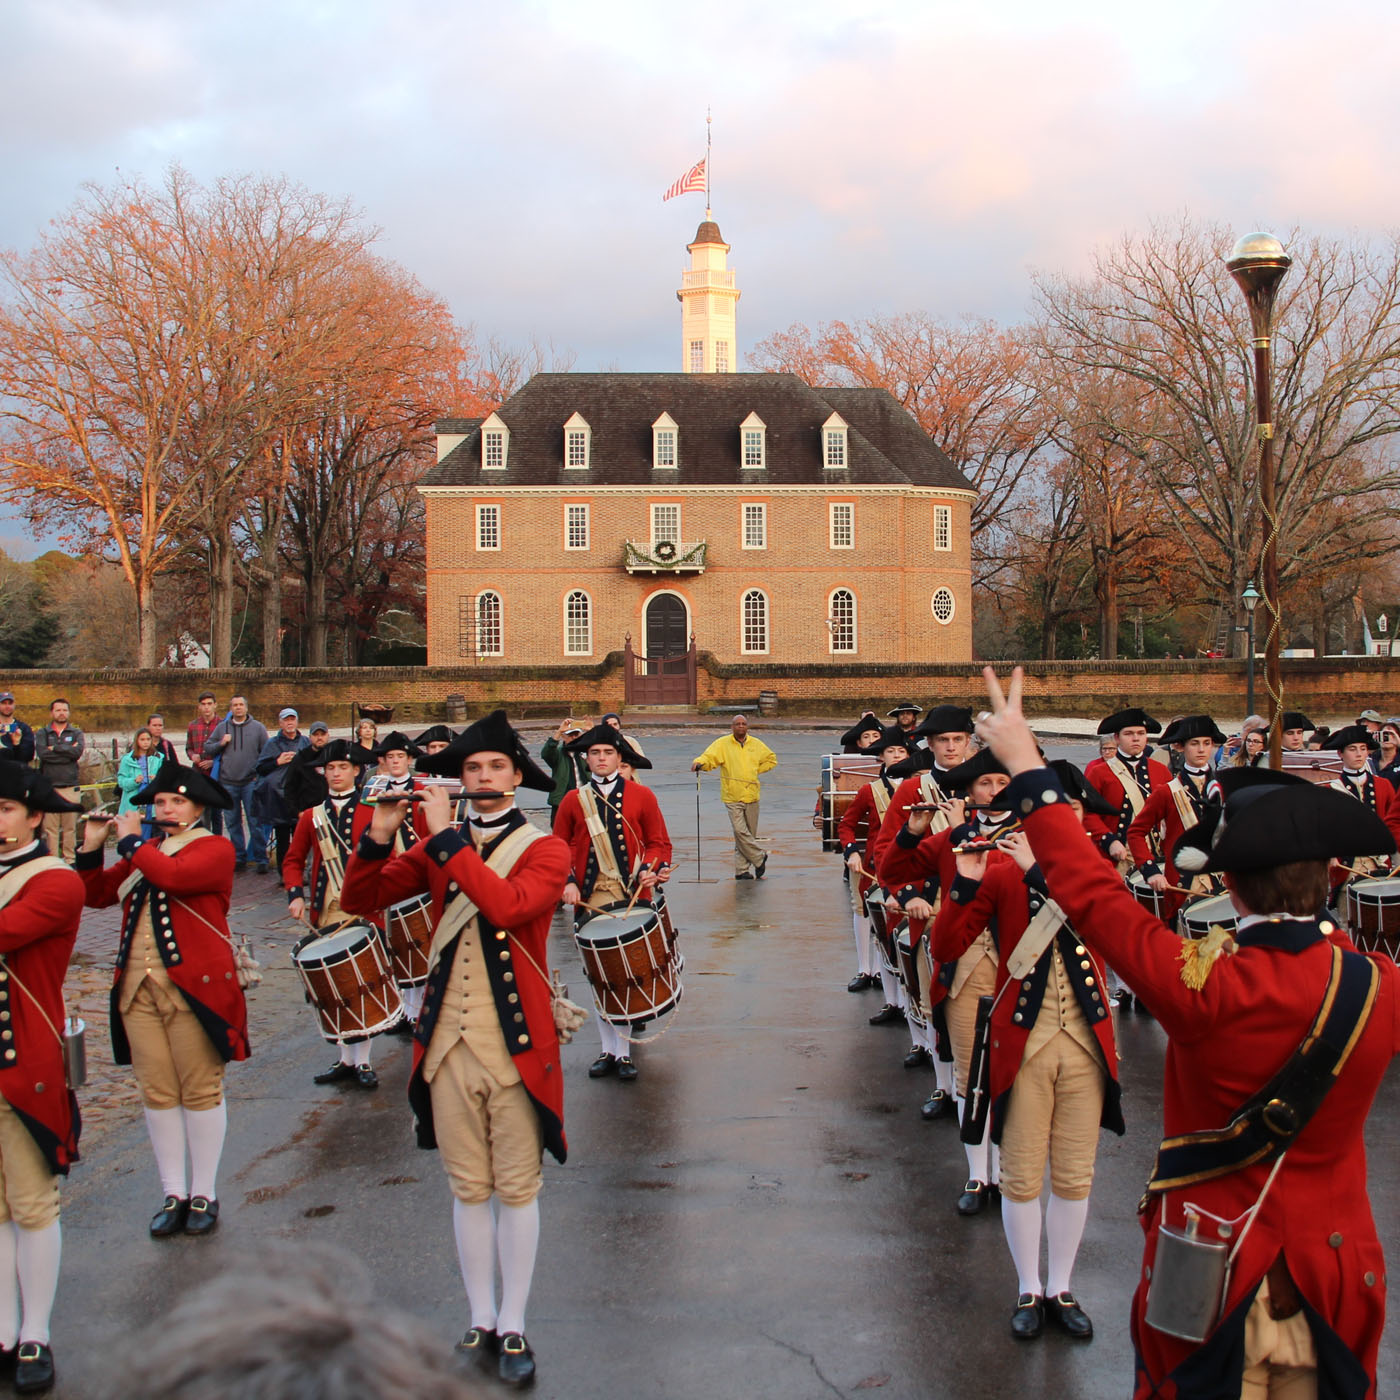 Fifes and drums perform in front of colonial capital